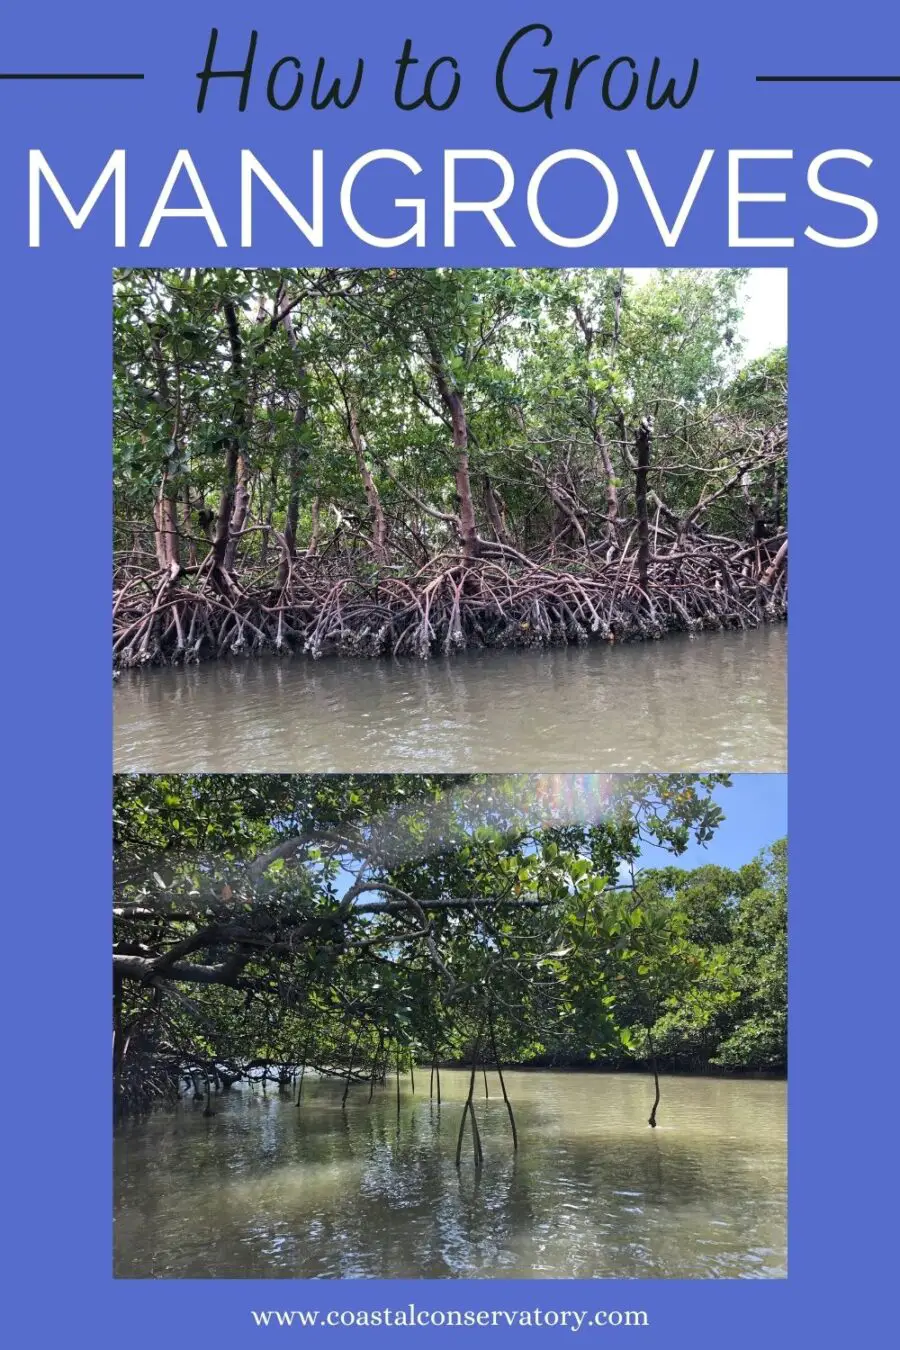 How to grow mangroves